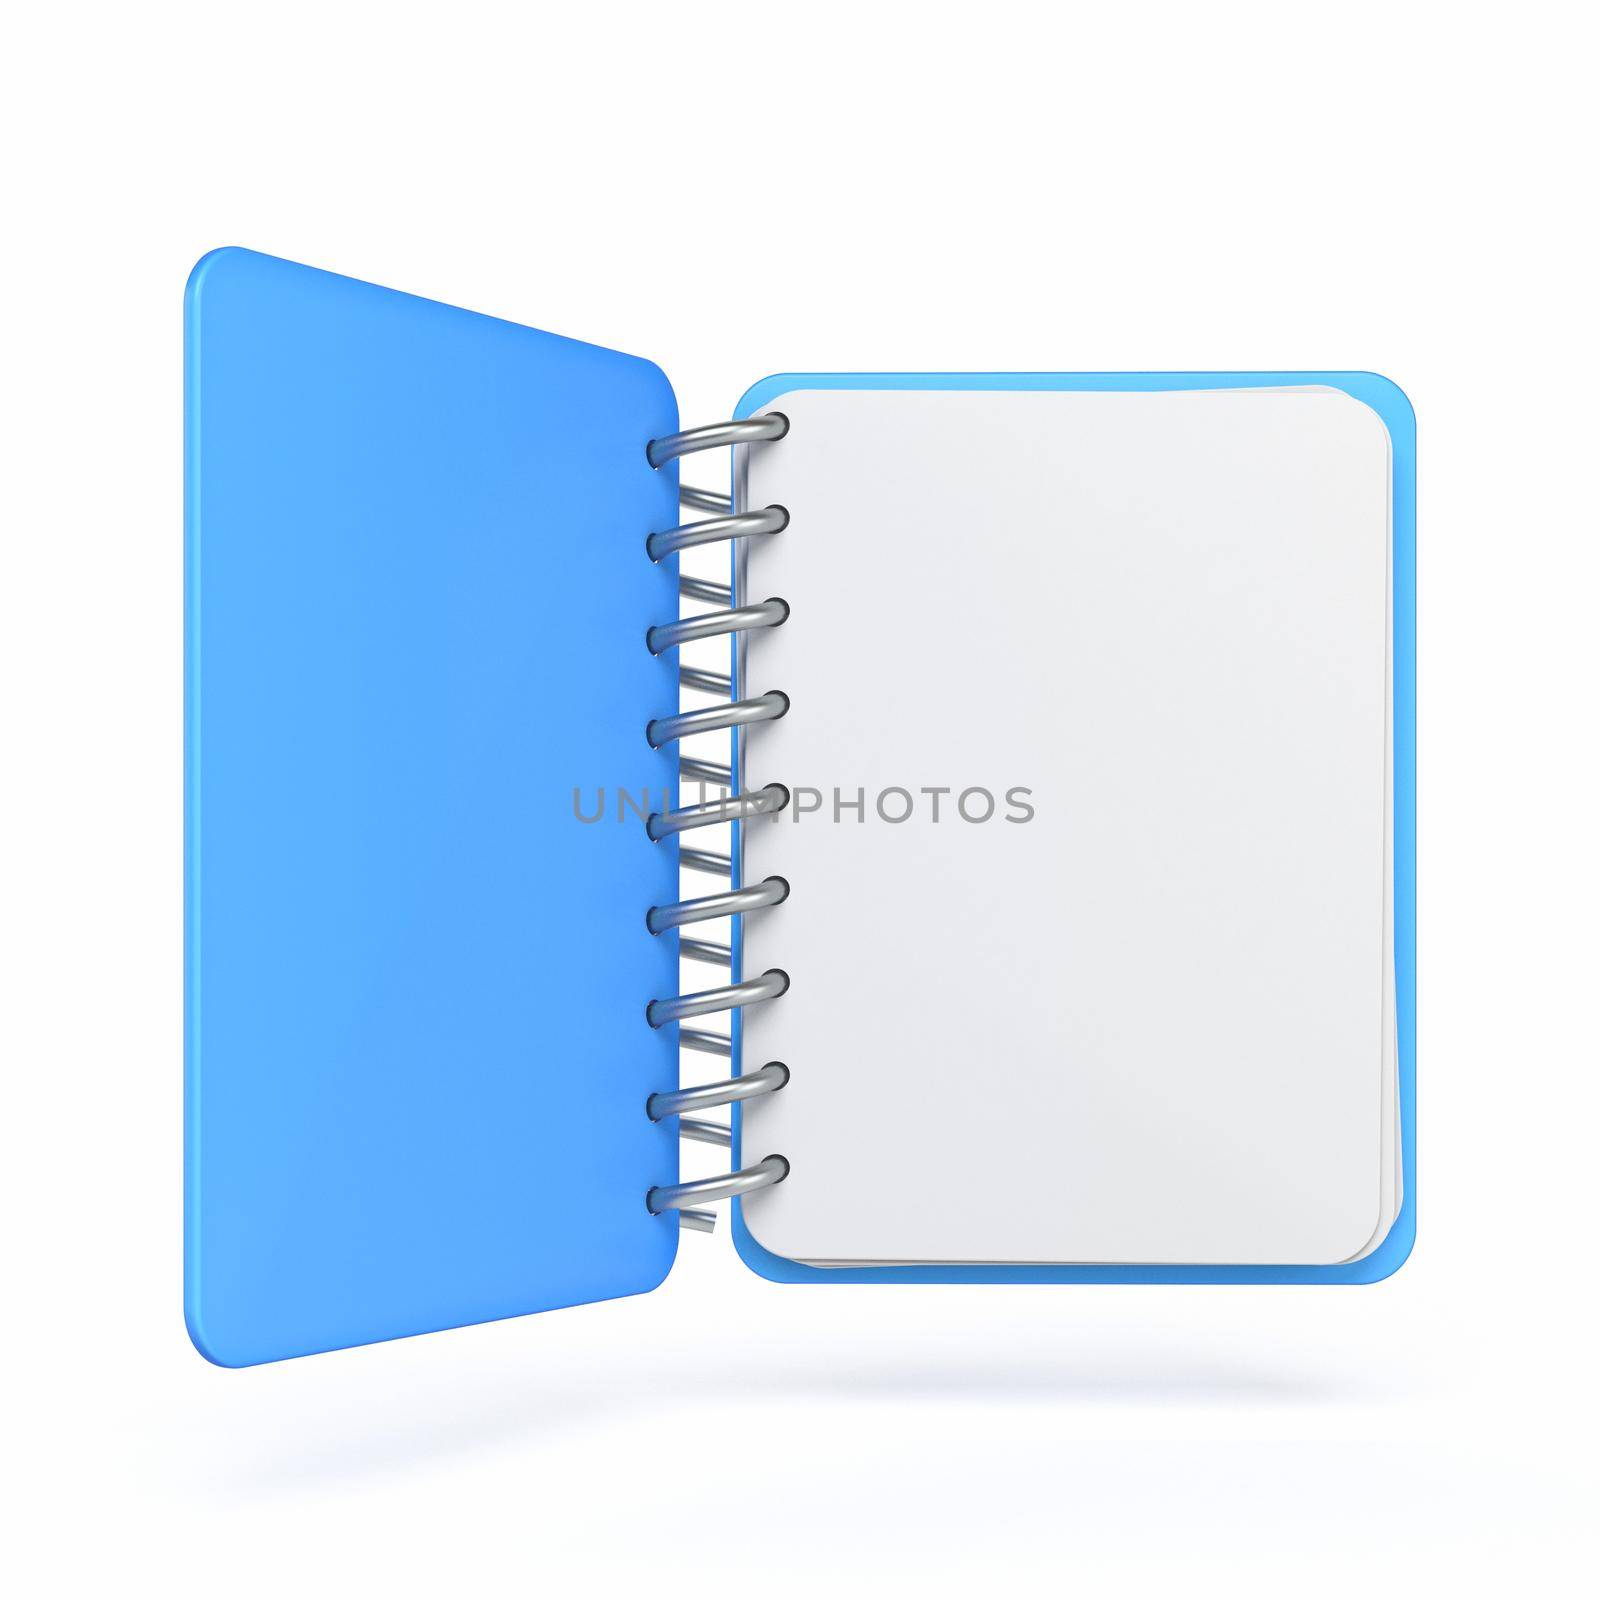 Blue empty notepad 3D rendering illustration isolated on white background